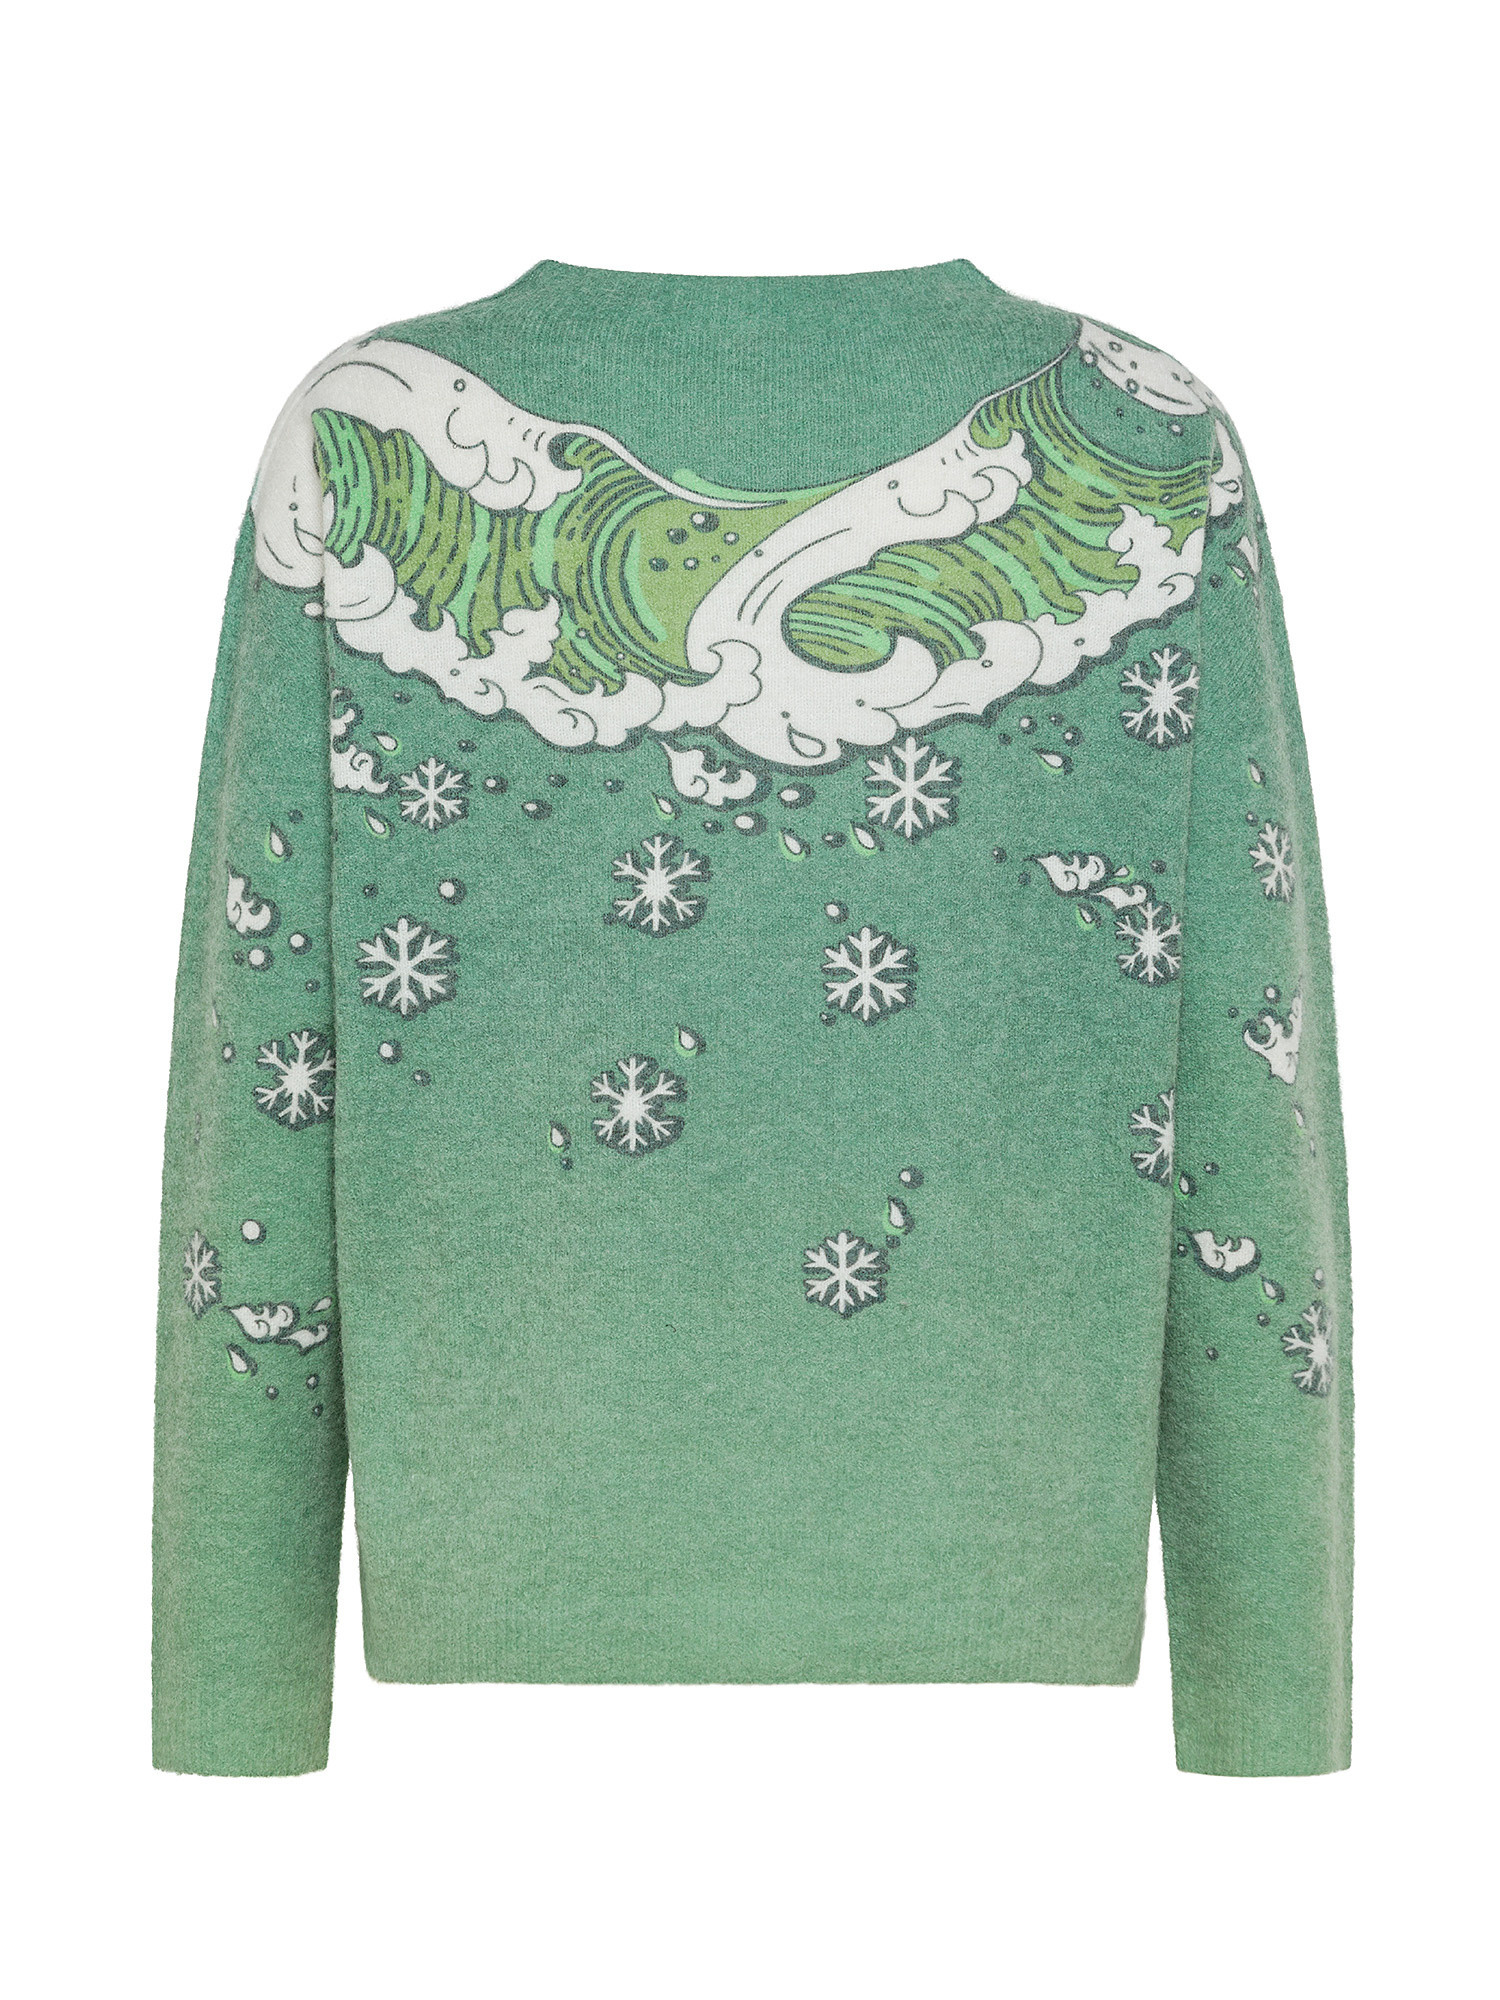 Pullover The Surfer’s Christmas by Paula Cademartori, , large image number 1